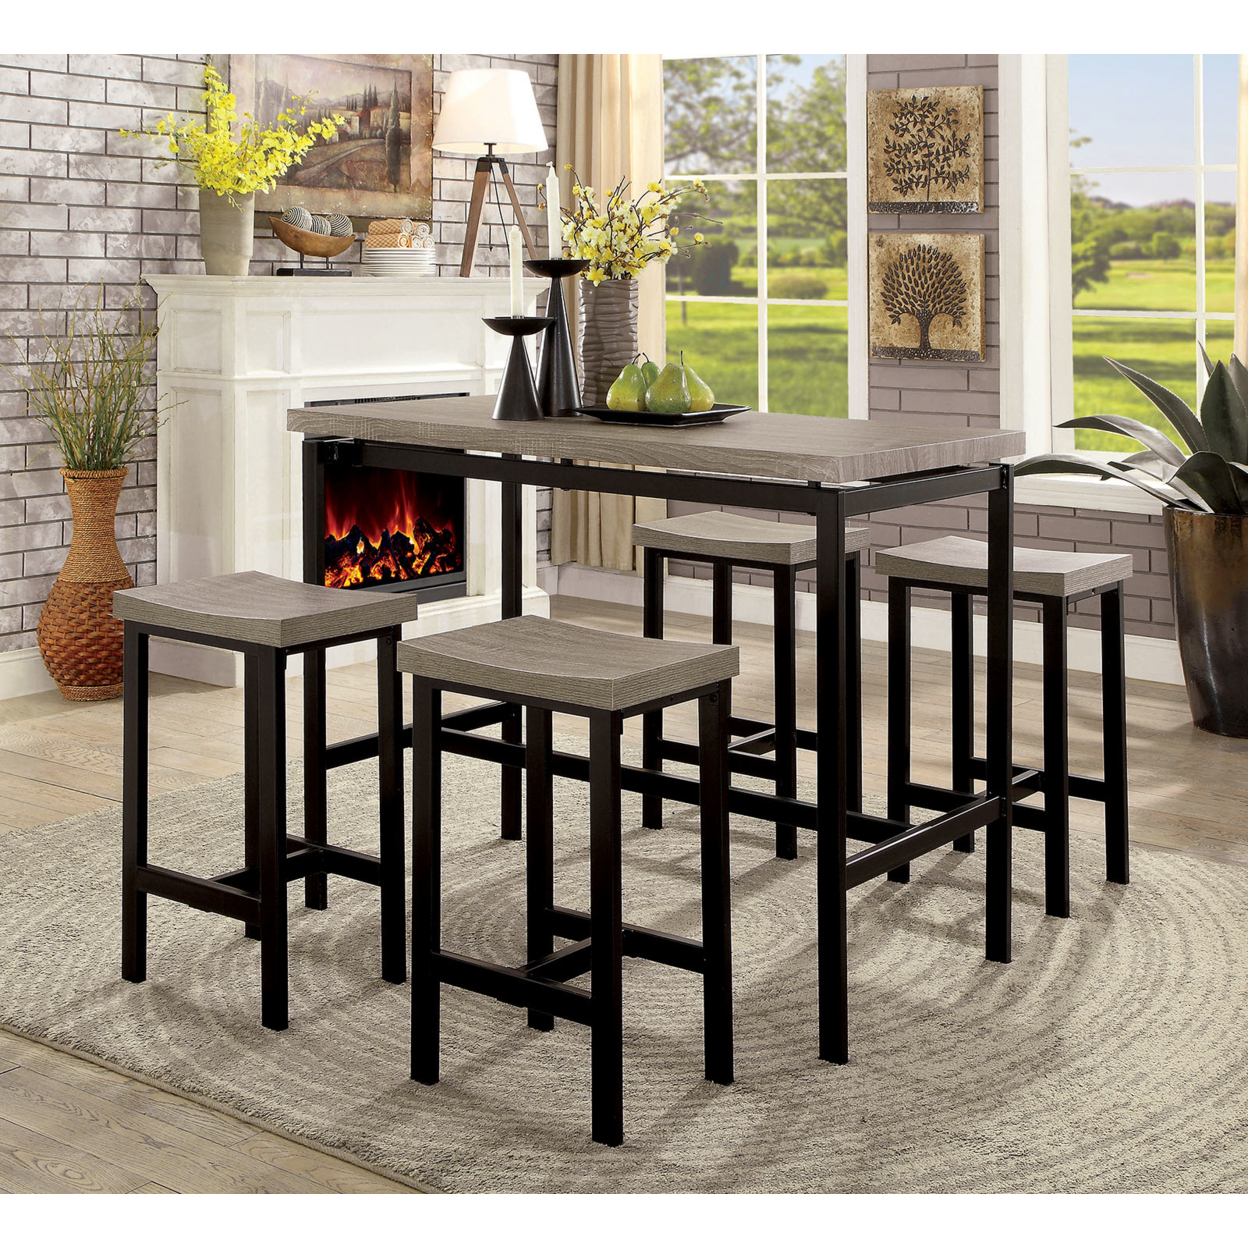 5 Piece Wooden Counter Height Table Set In Natural Brown And Black- Saltoro Sherpi